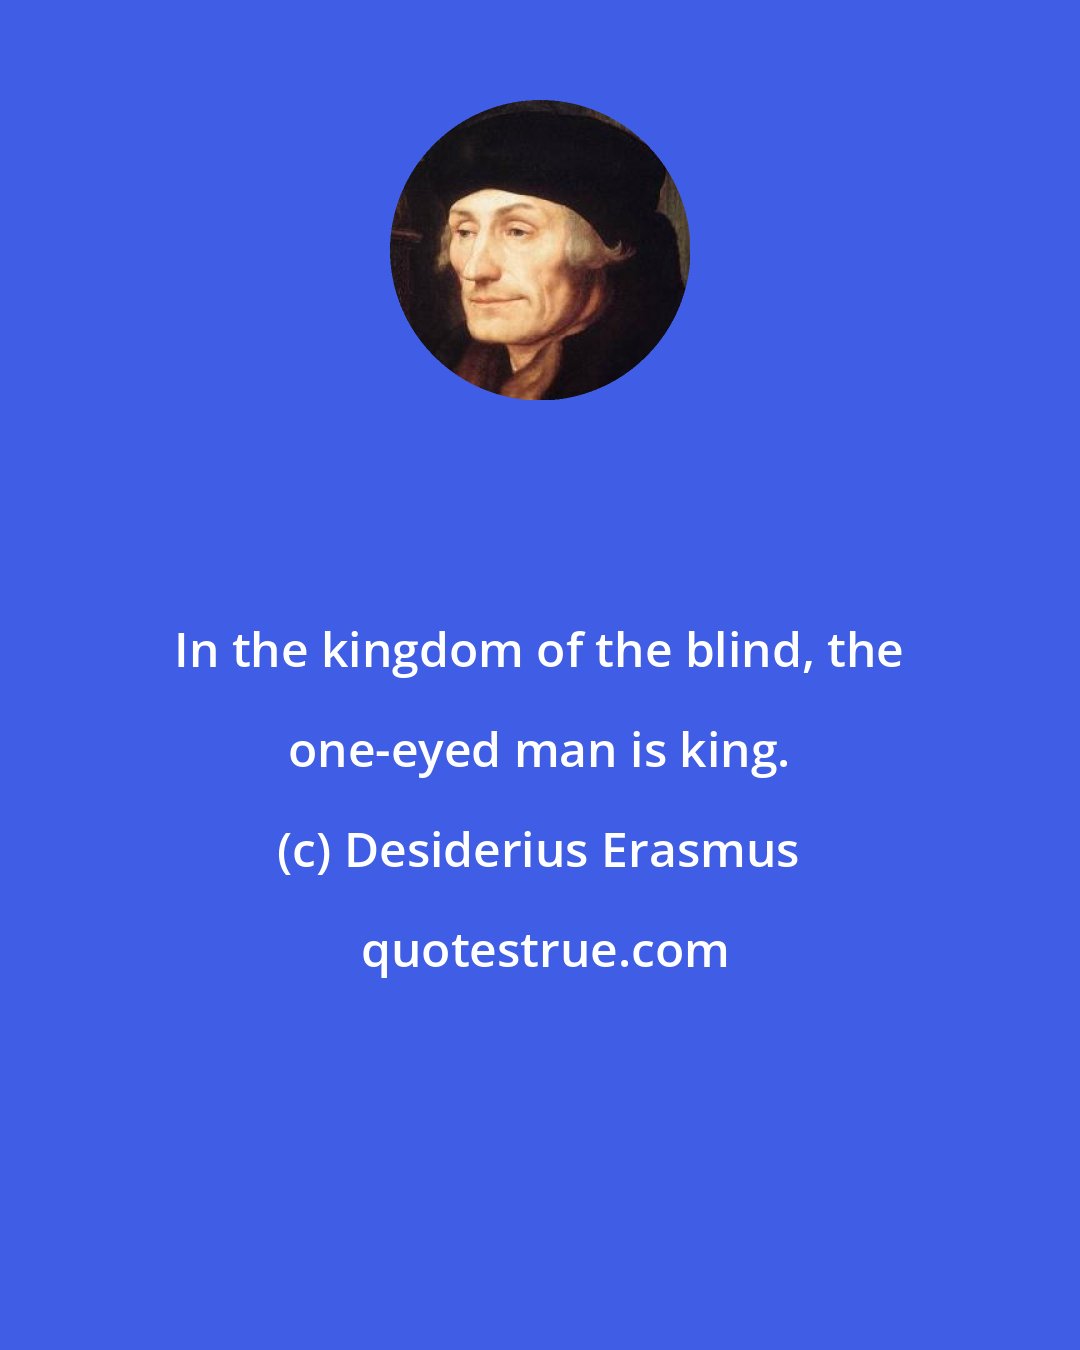 Desiderius Erasmus: In the kingdom of the blind, the one-eyed man is king.